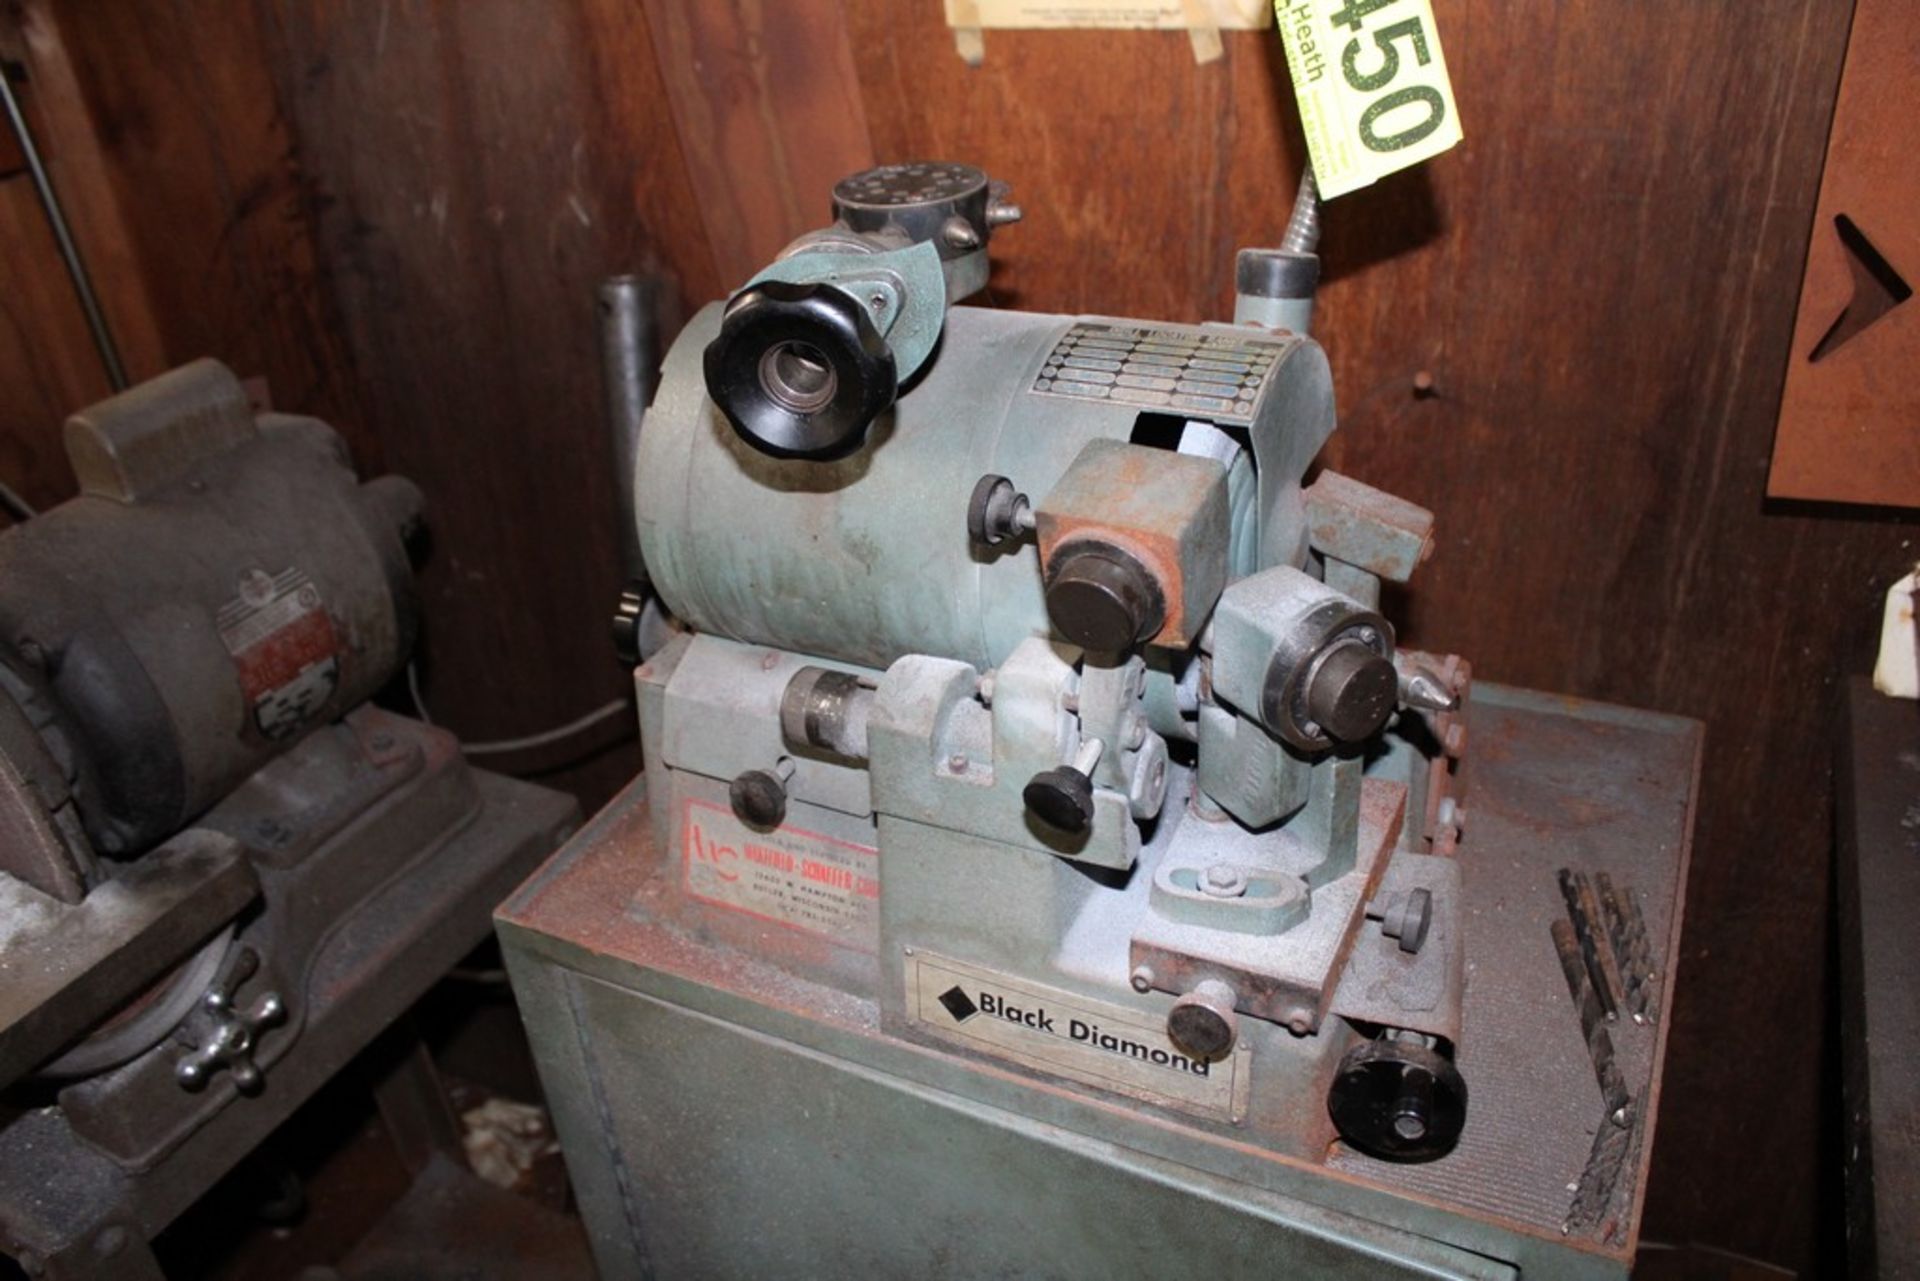 BLACK DIAMOND 1/16"-3/4" BW90A DRILL GRINDER, S/N 27960, WITH COLLETS & CABINET - Image 2 of 2